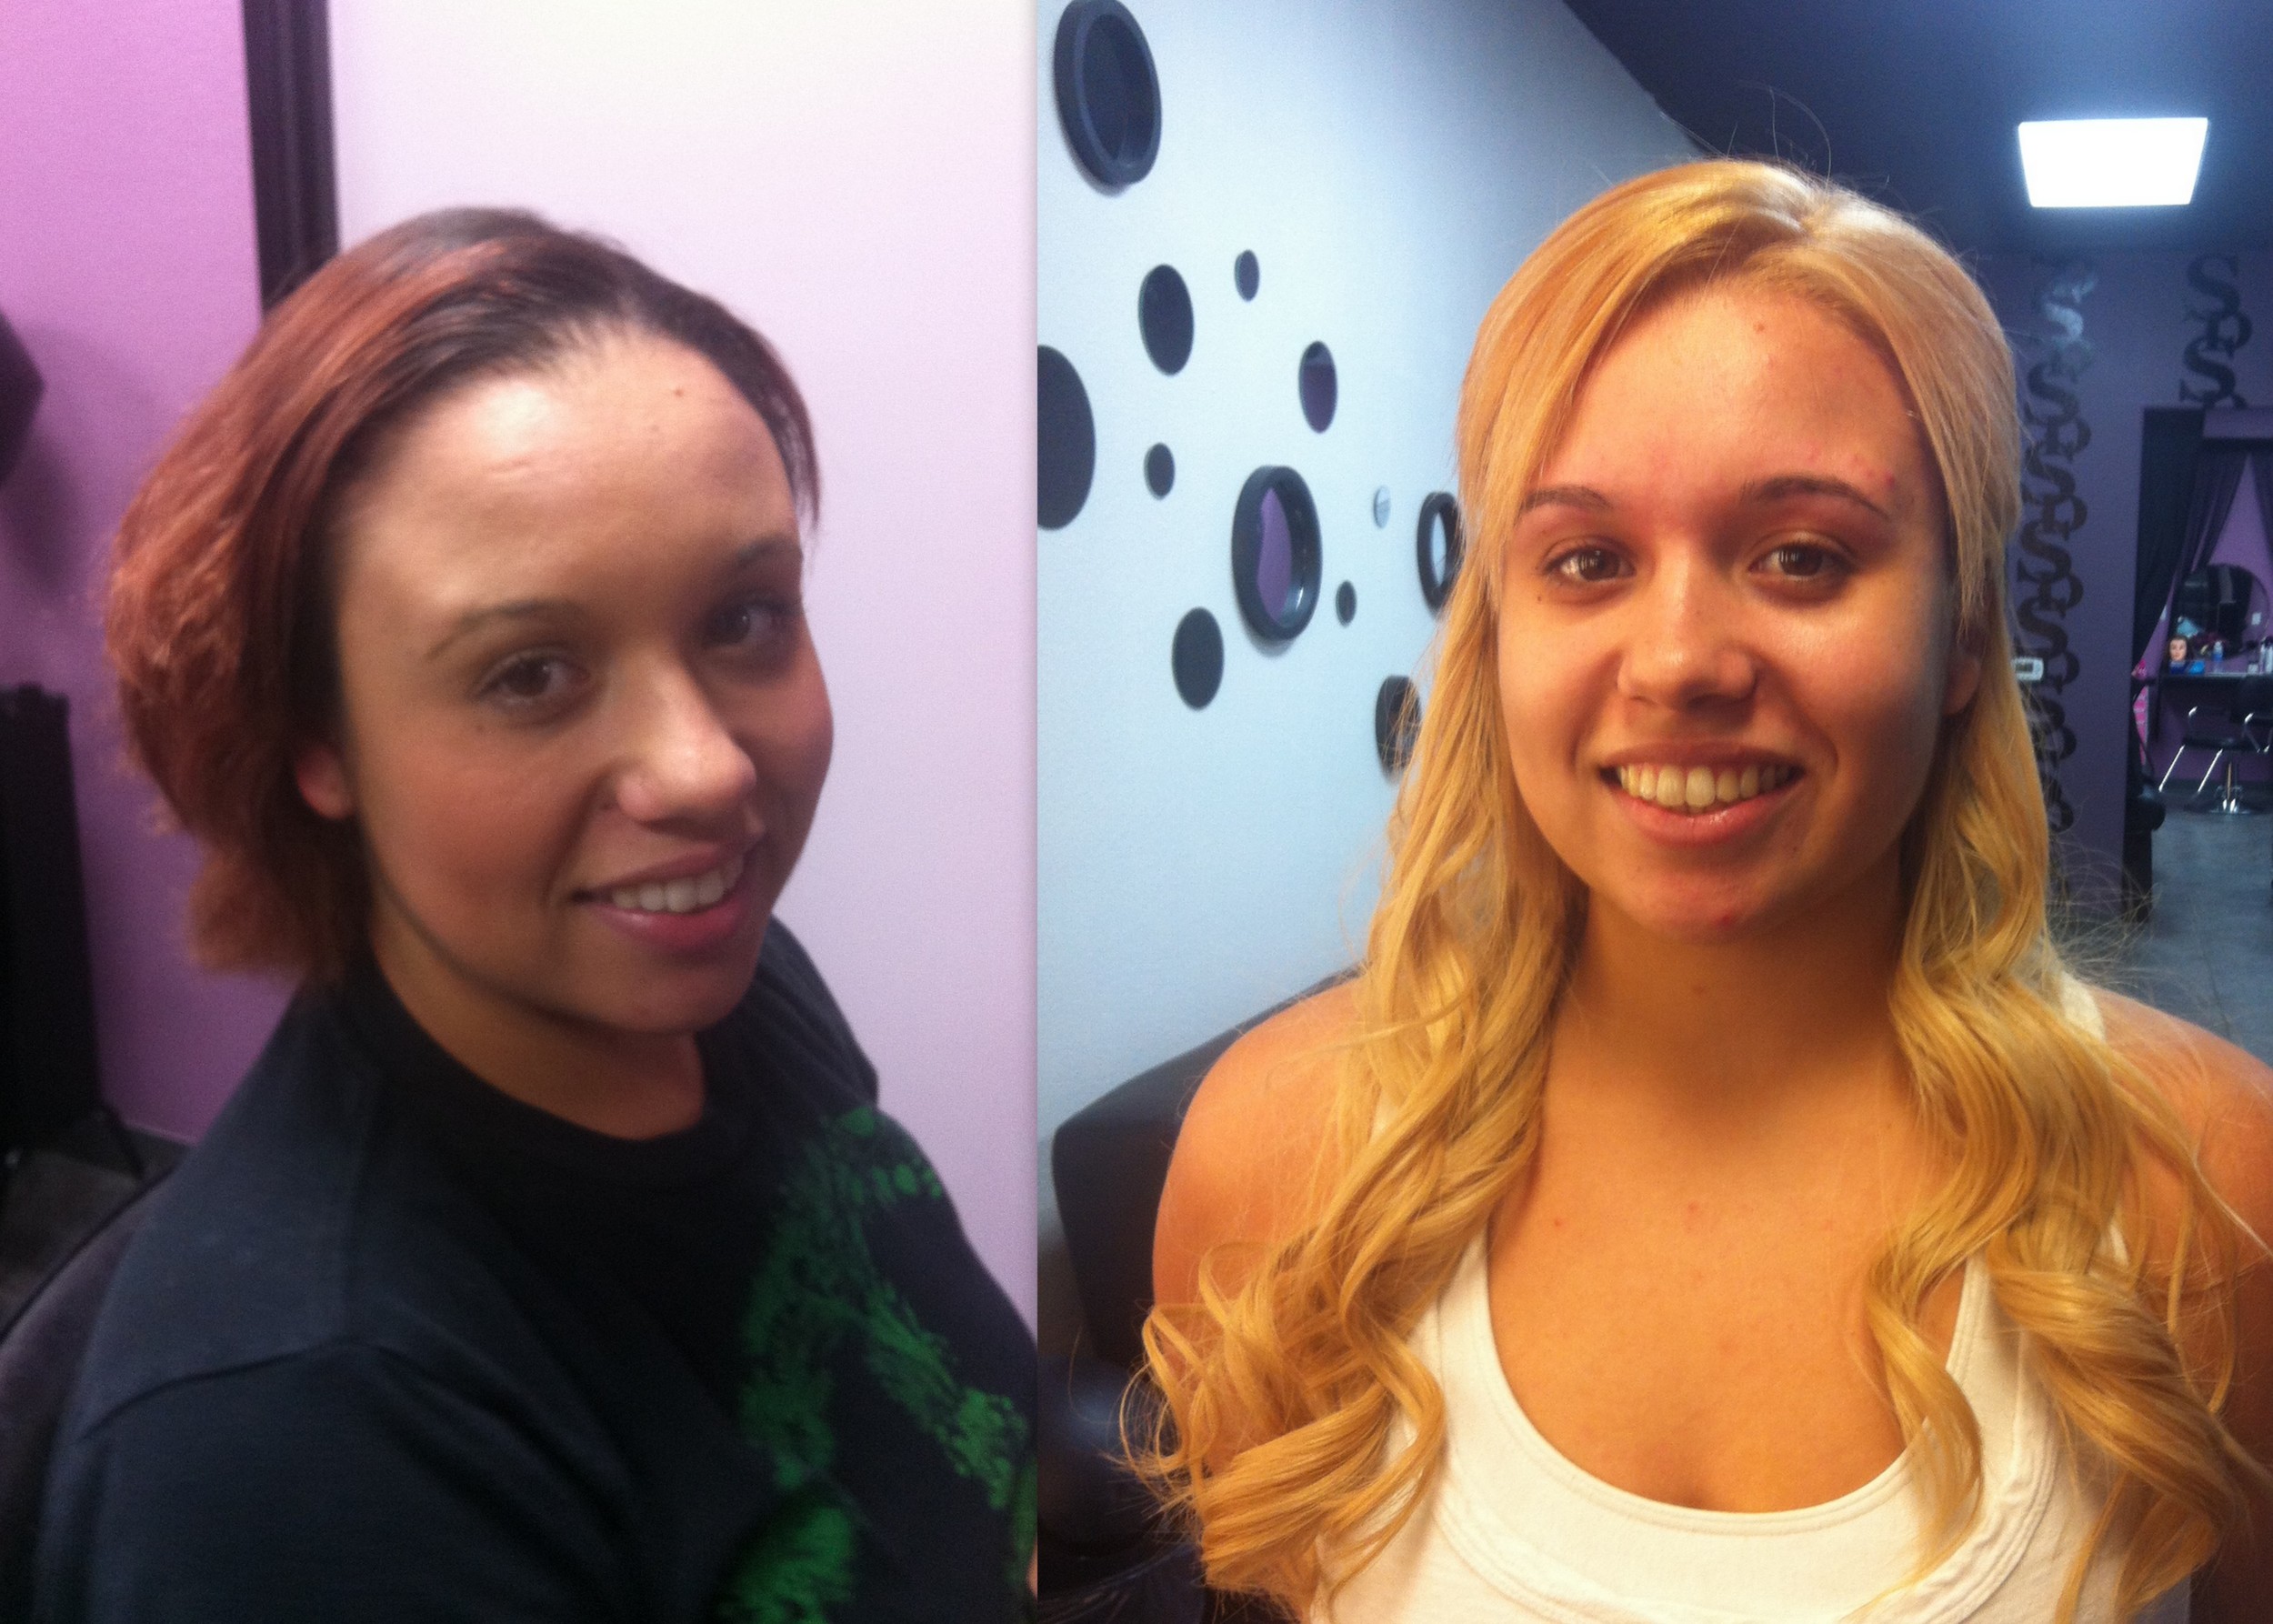 Makeover! Color, cut, extensions